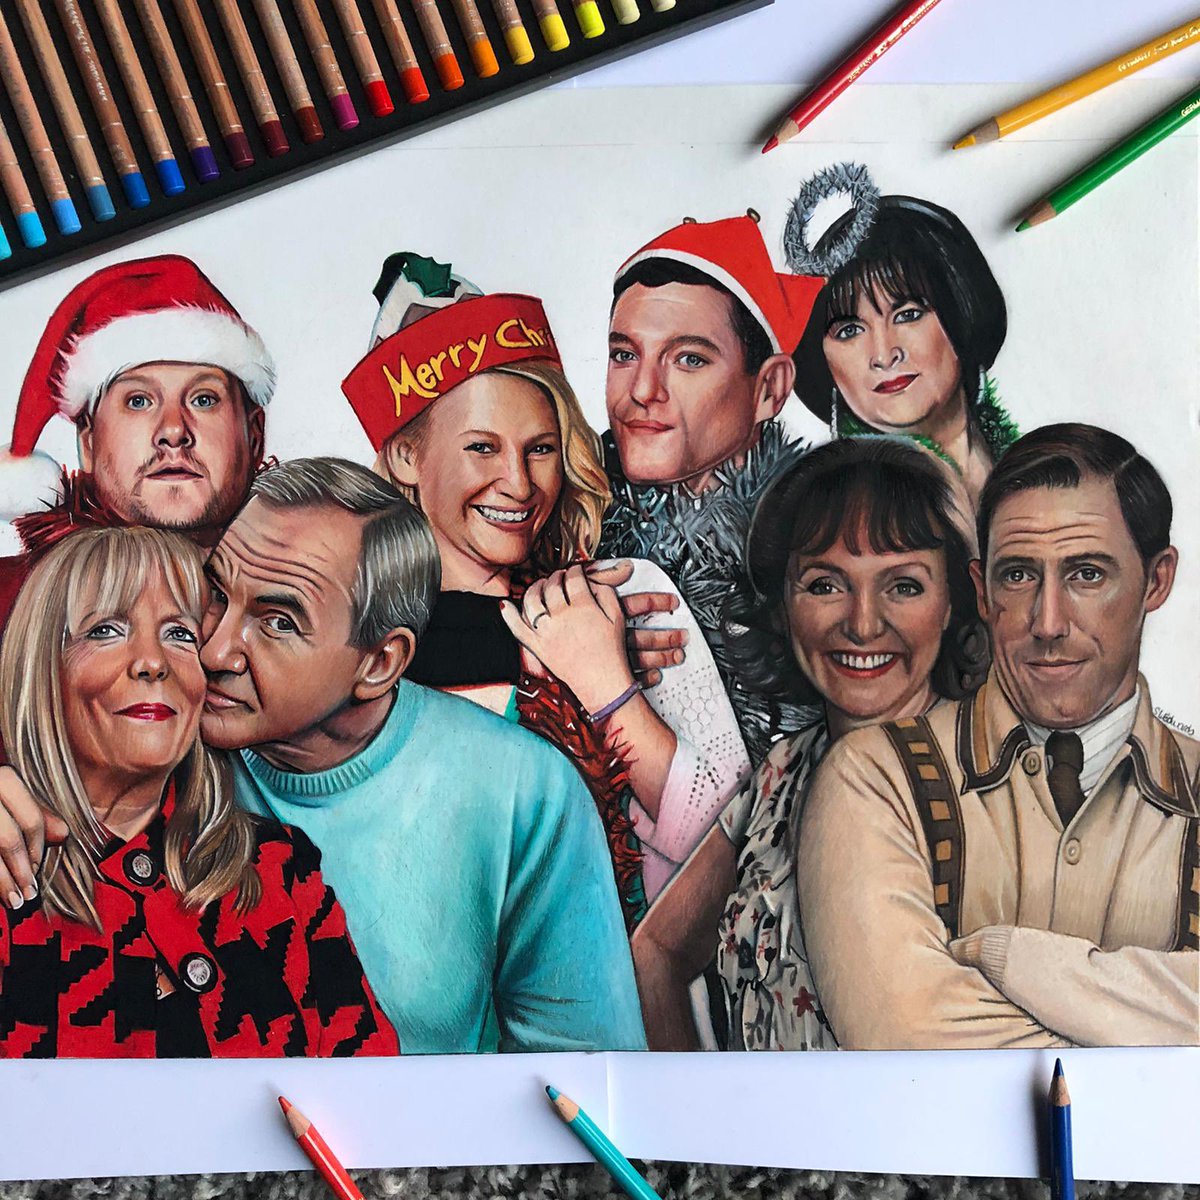 My Gavin & Stacey drawing from the 2019 Christmas special. I will have to do a new drawing this year 😅